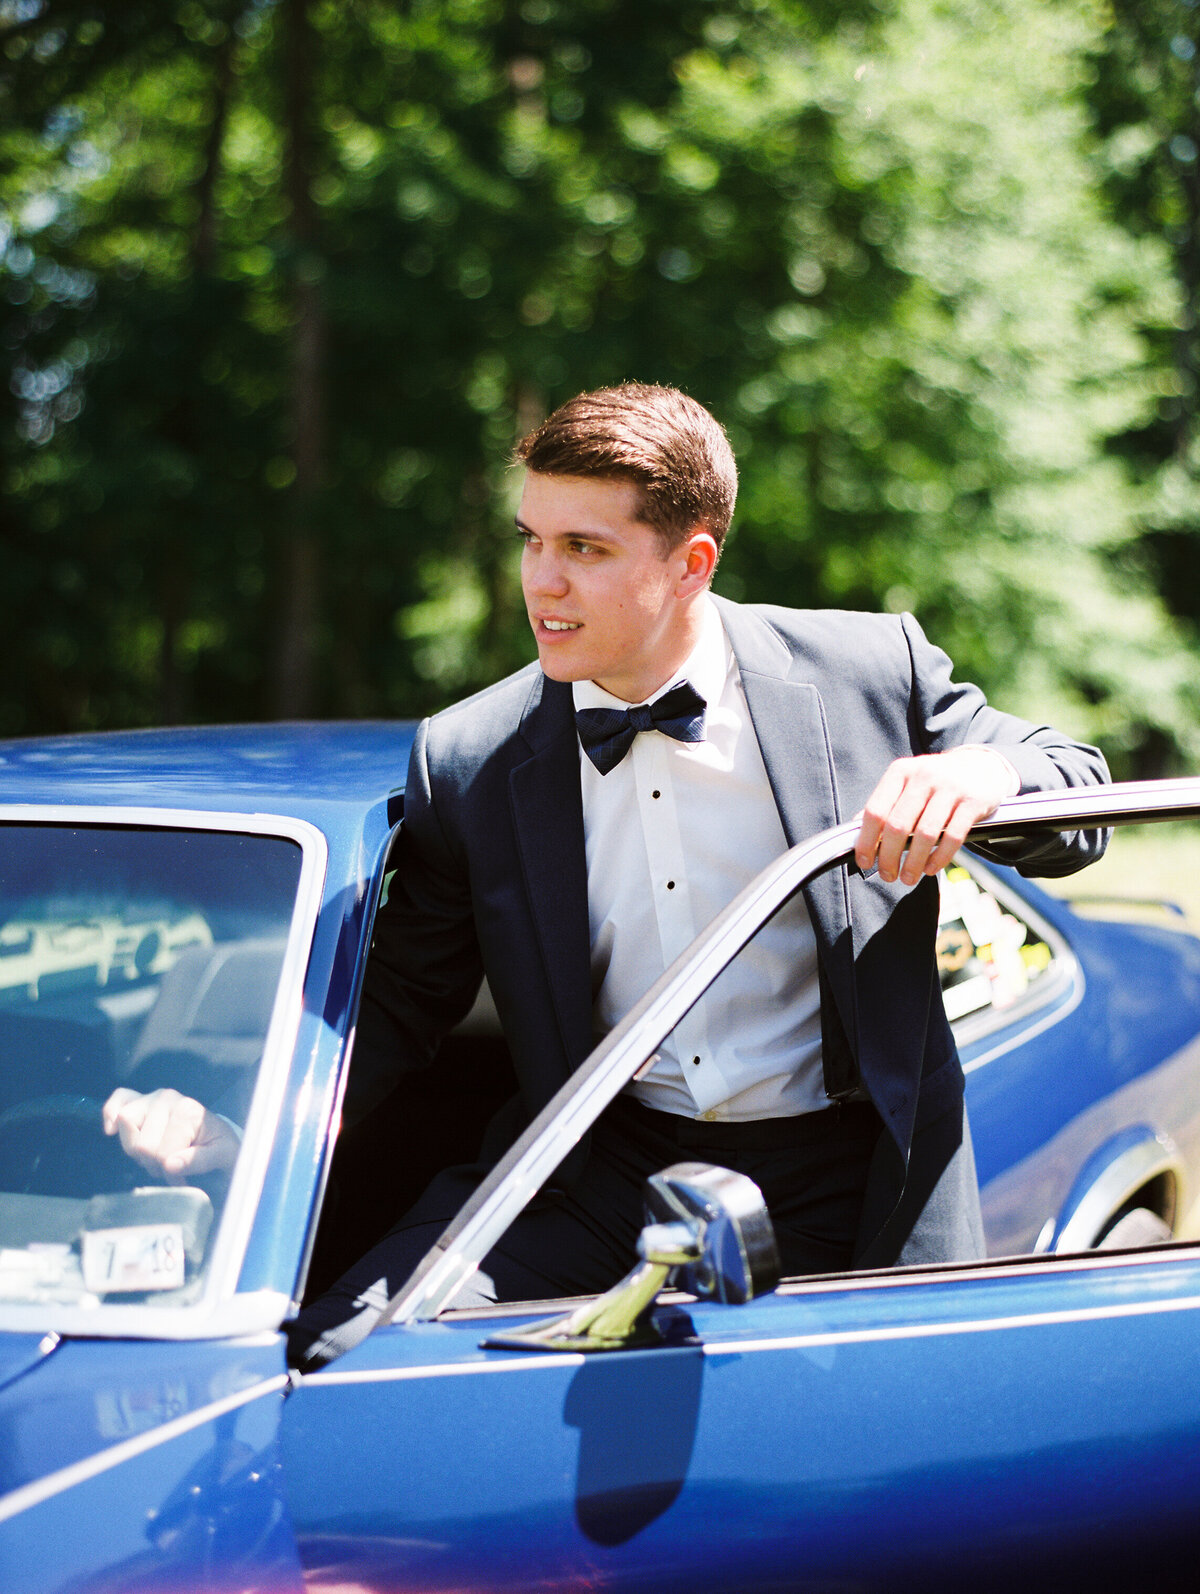 Groom stepping out of a blue car